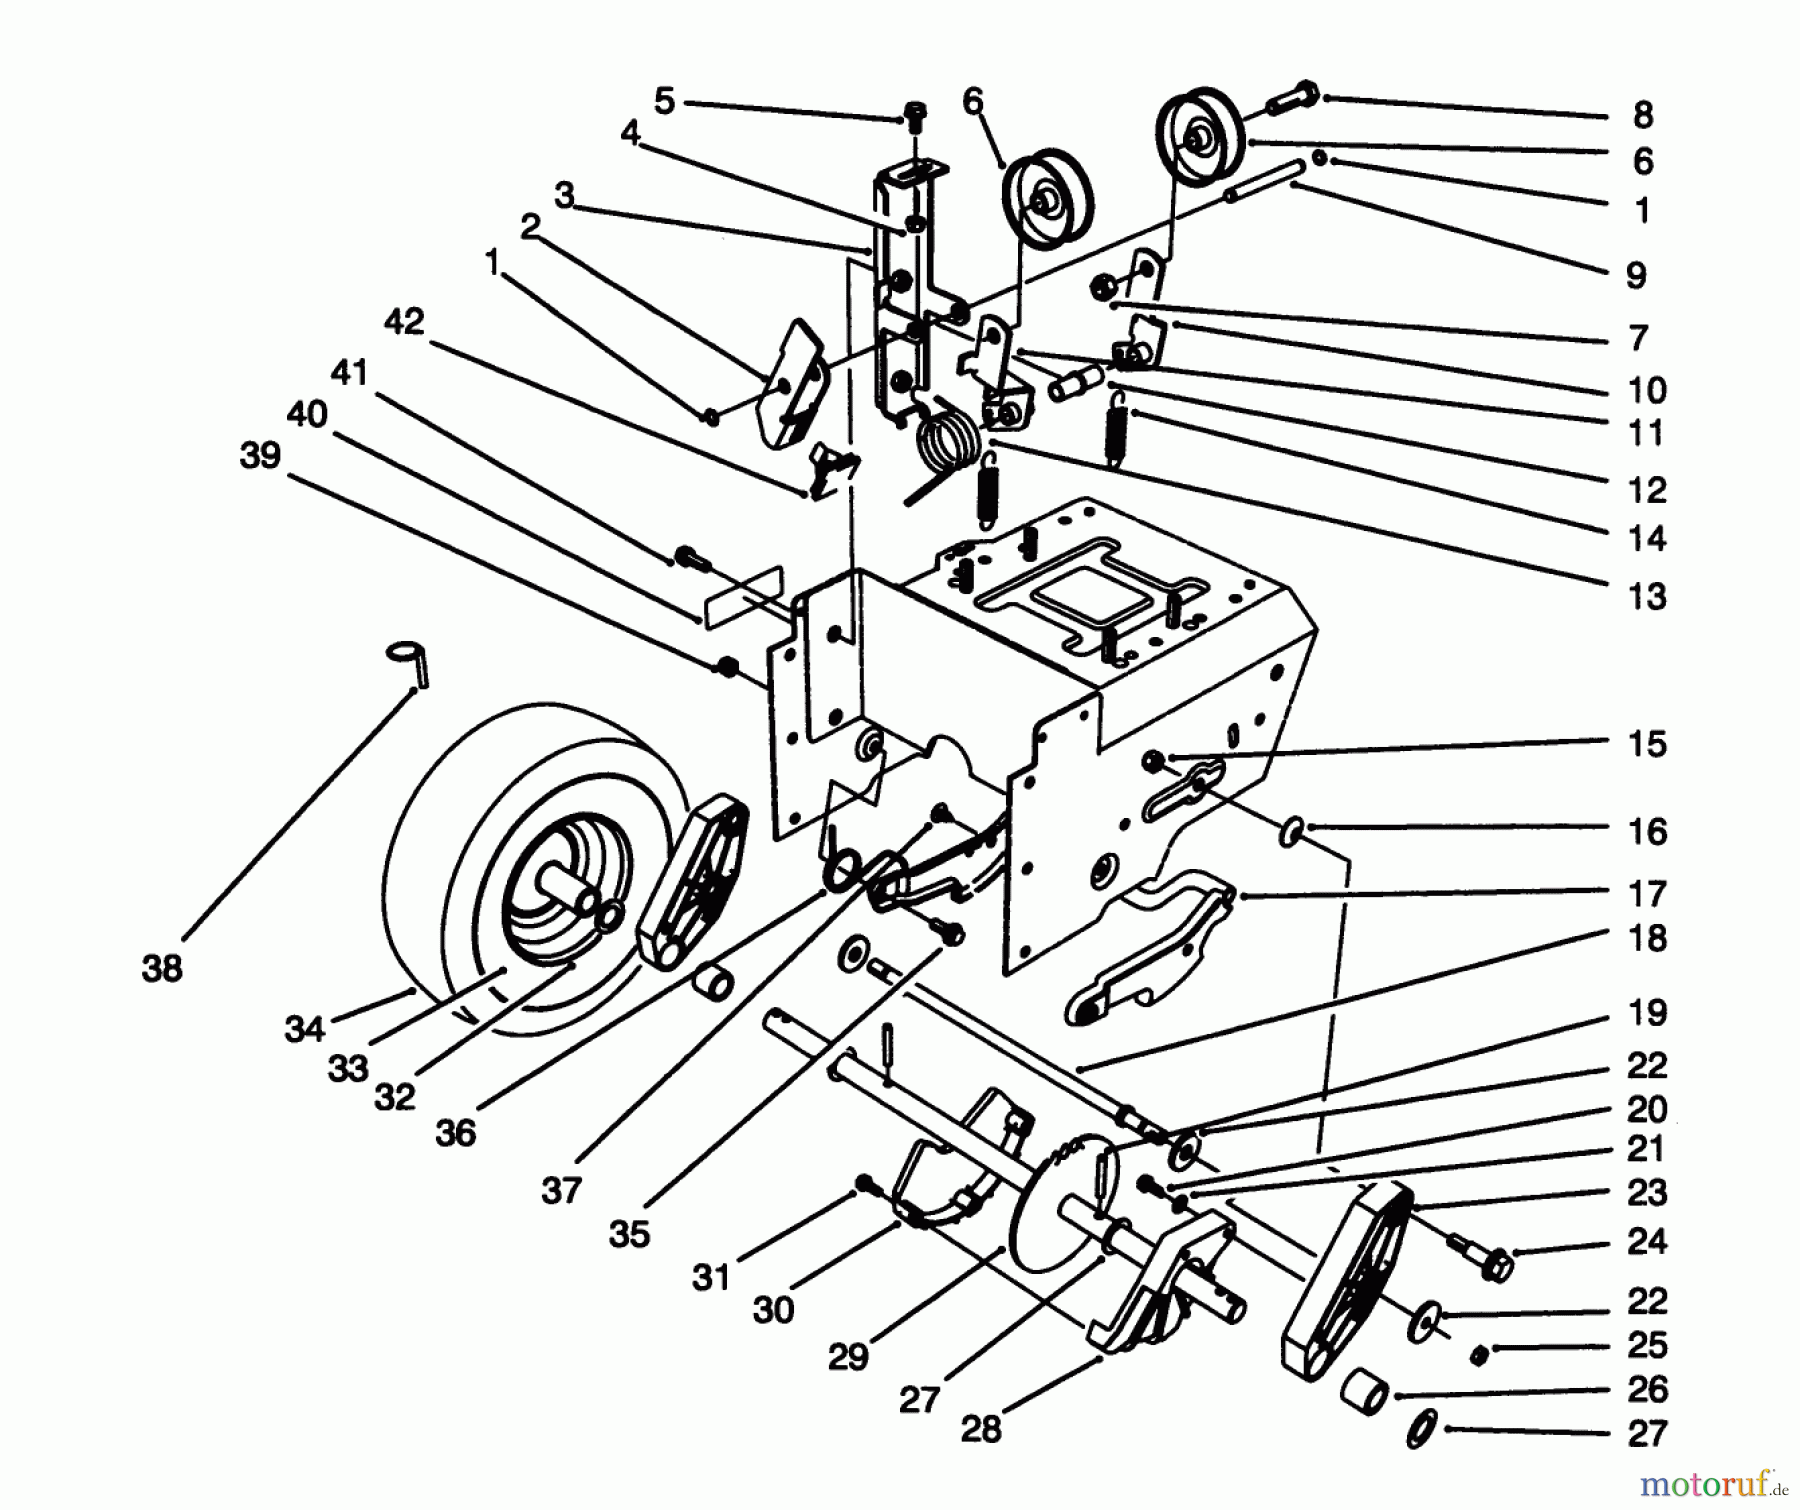  Toro Neu Snow Blowers/Snow Throwers Seite 1 38566 (1132) - Toro 1132 Power Shift Snowthrower, 1994 (49000001-49999999) TRACTION DRIVE ASSEMBLY